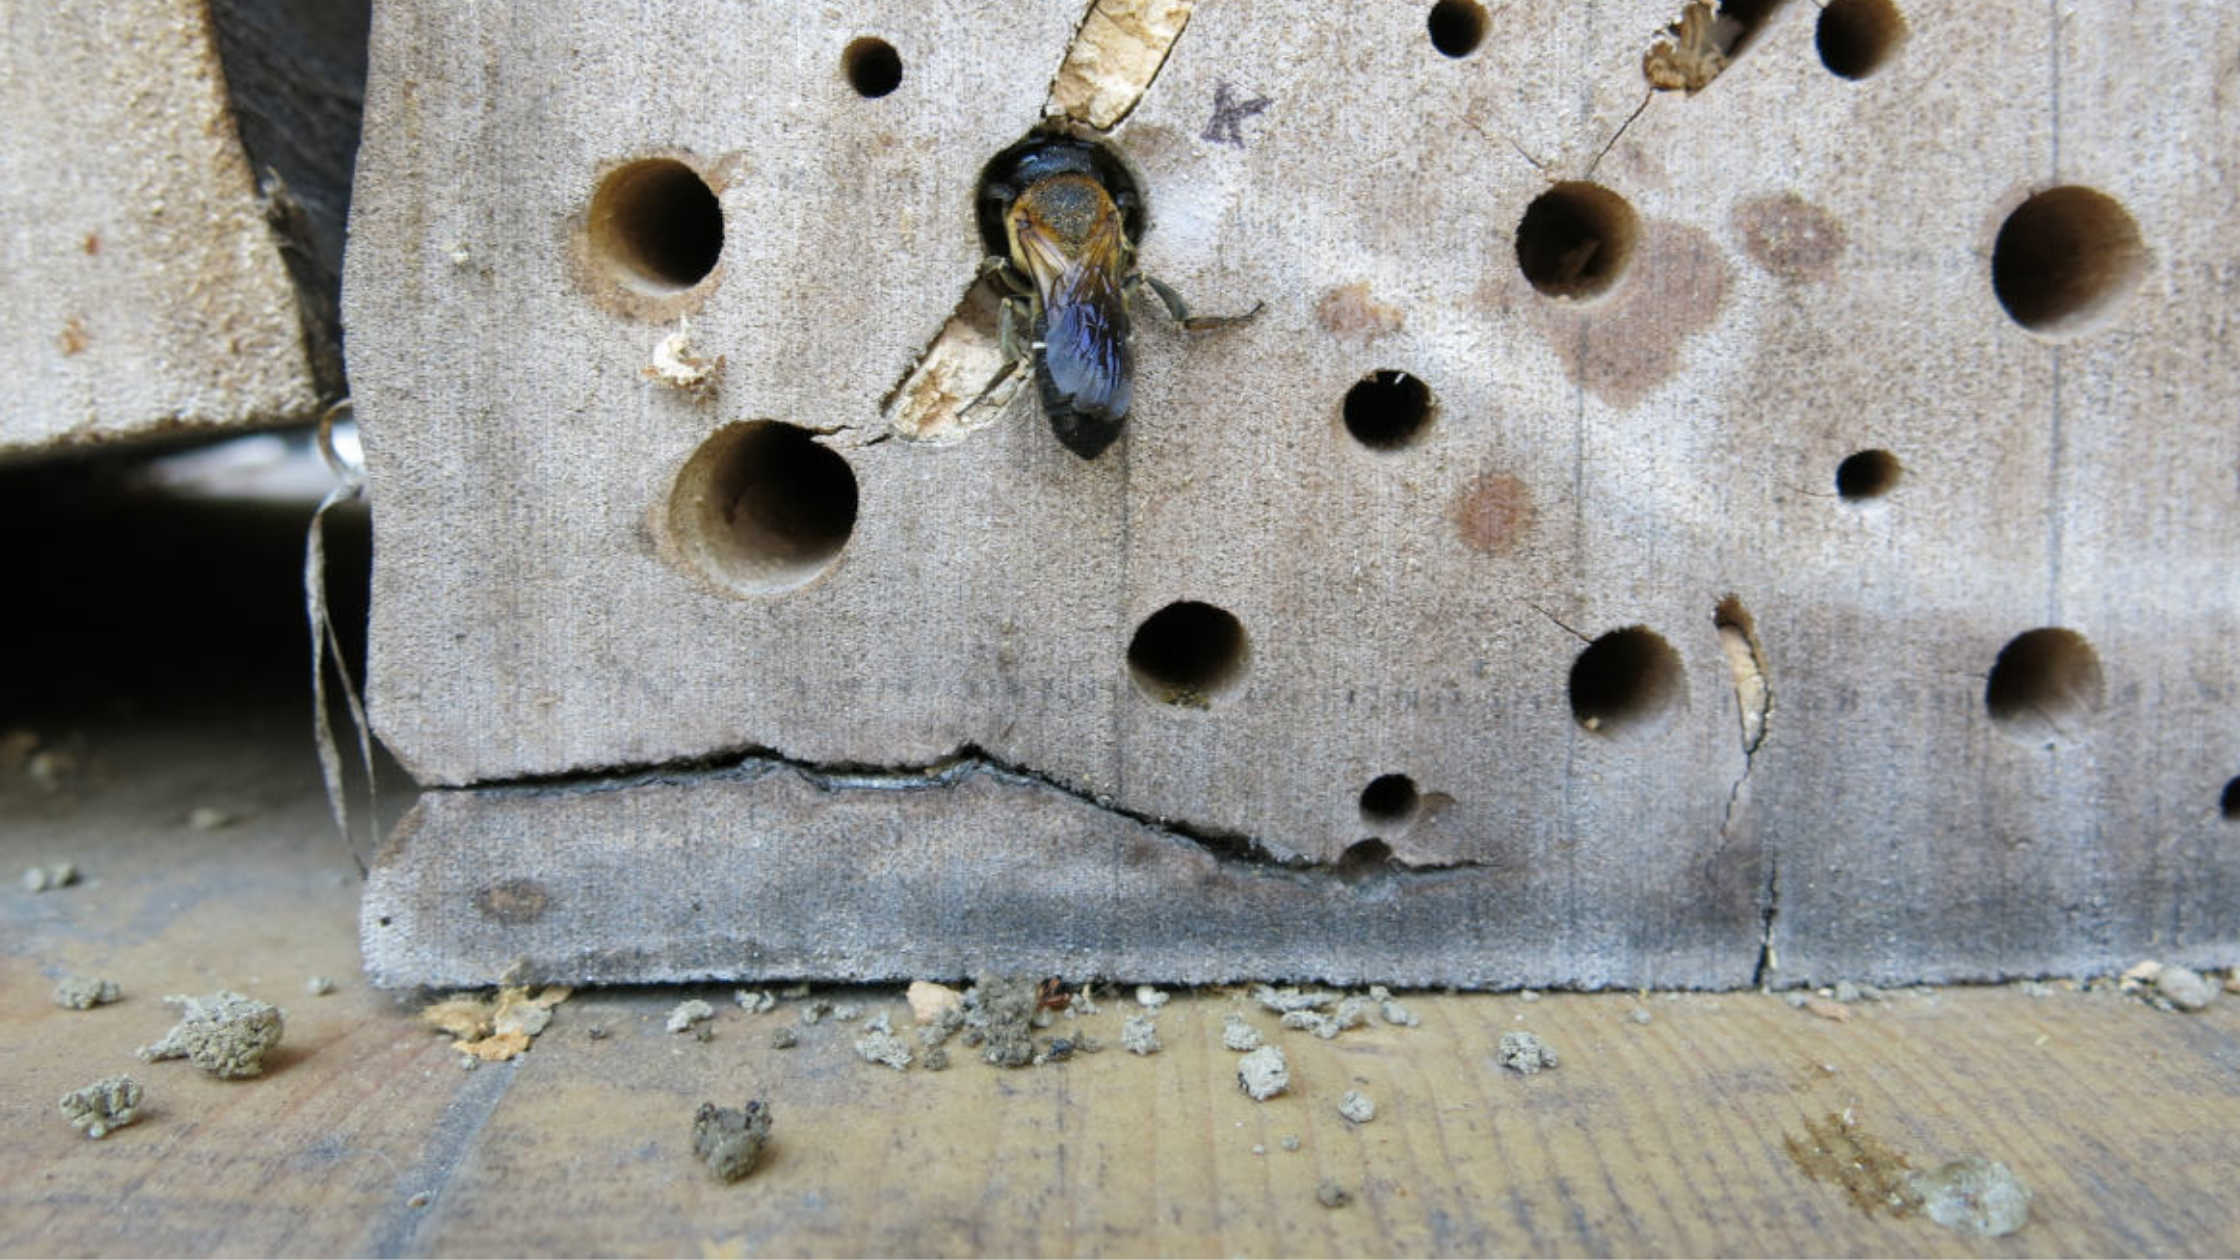 Do Bug Hotels Need Cleaning: Keeping Your Little Insect Friends Happy!